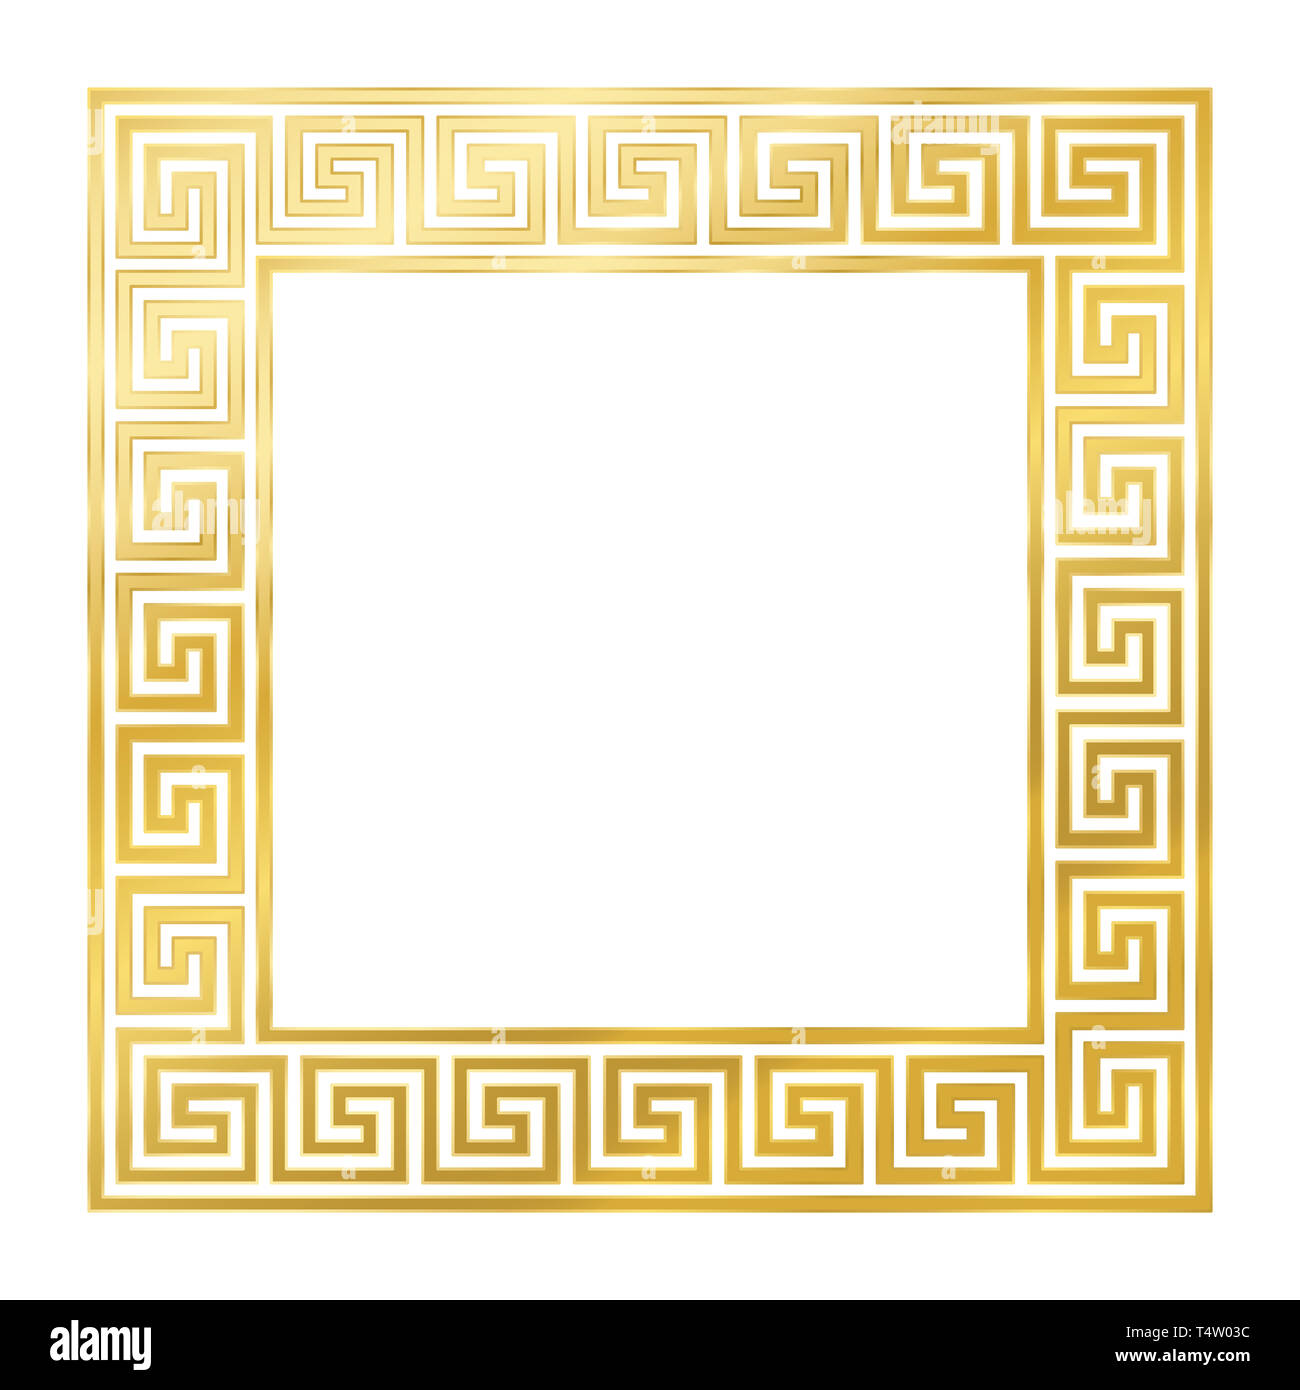 Square meander frame, seamless goldenb pattern. Meandros, a decorative border, constructed from continuous lines, shaped into a repeated motif. Stock Photo